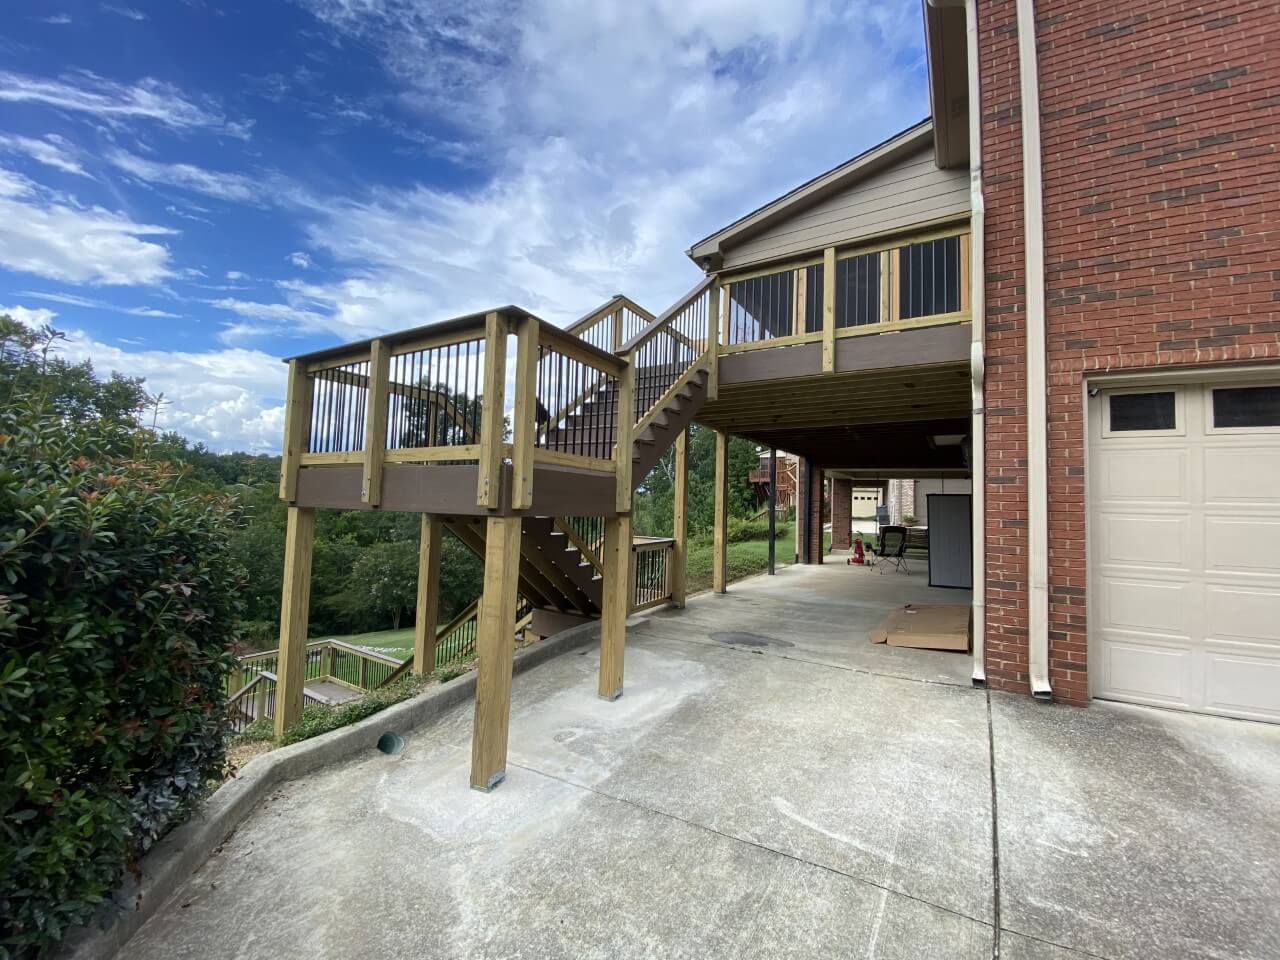 Deck stairs with railing